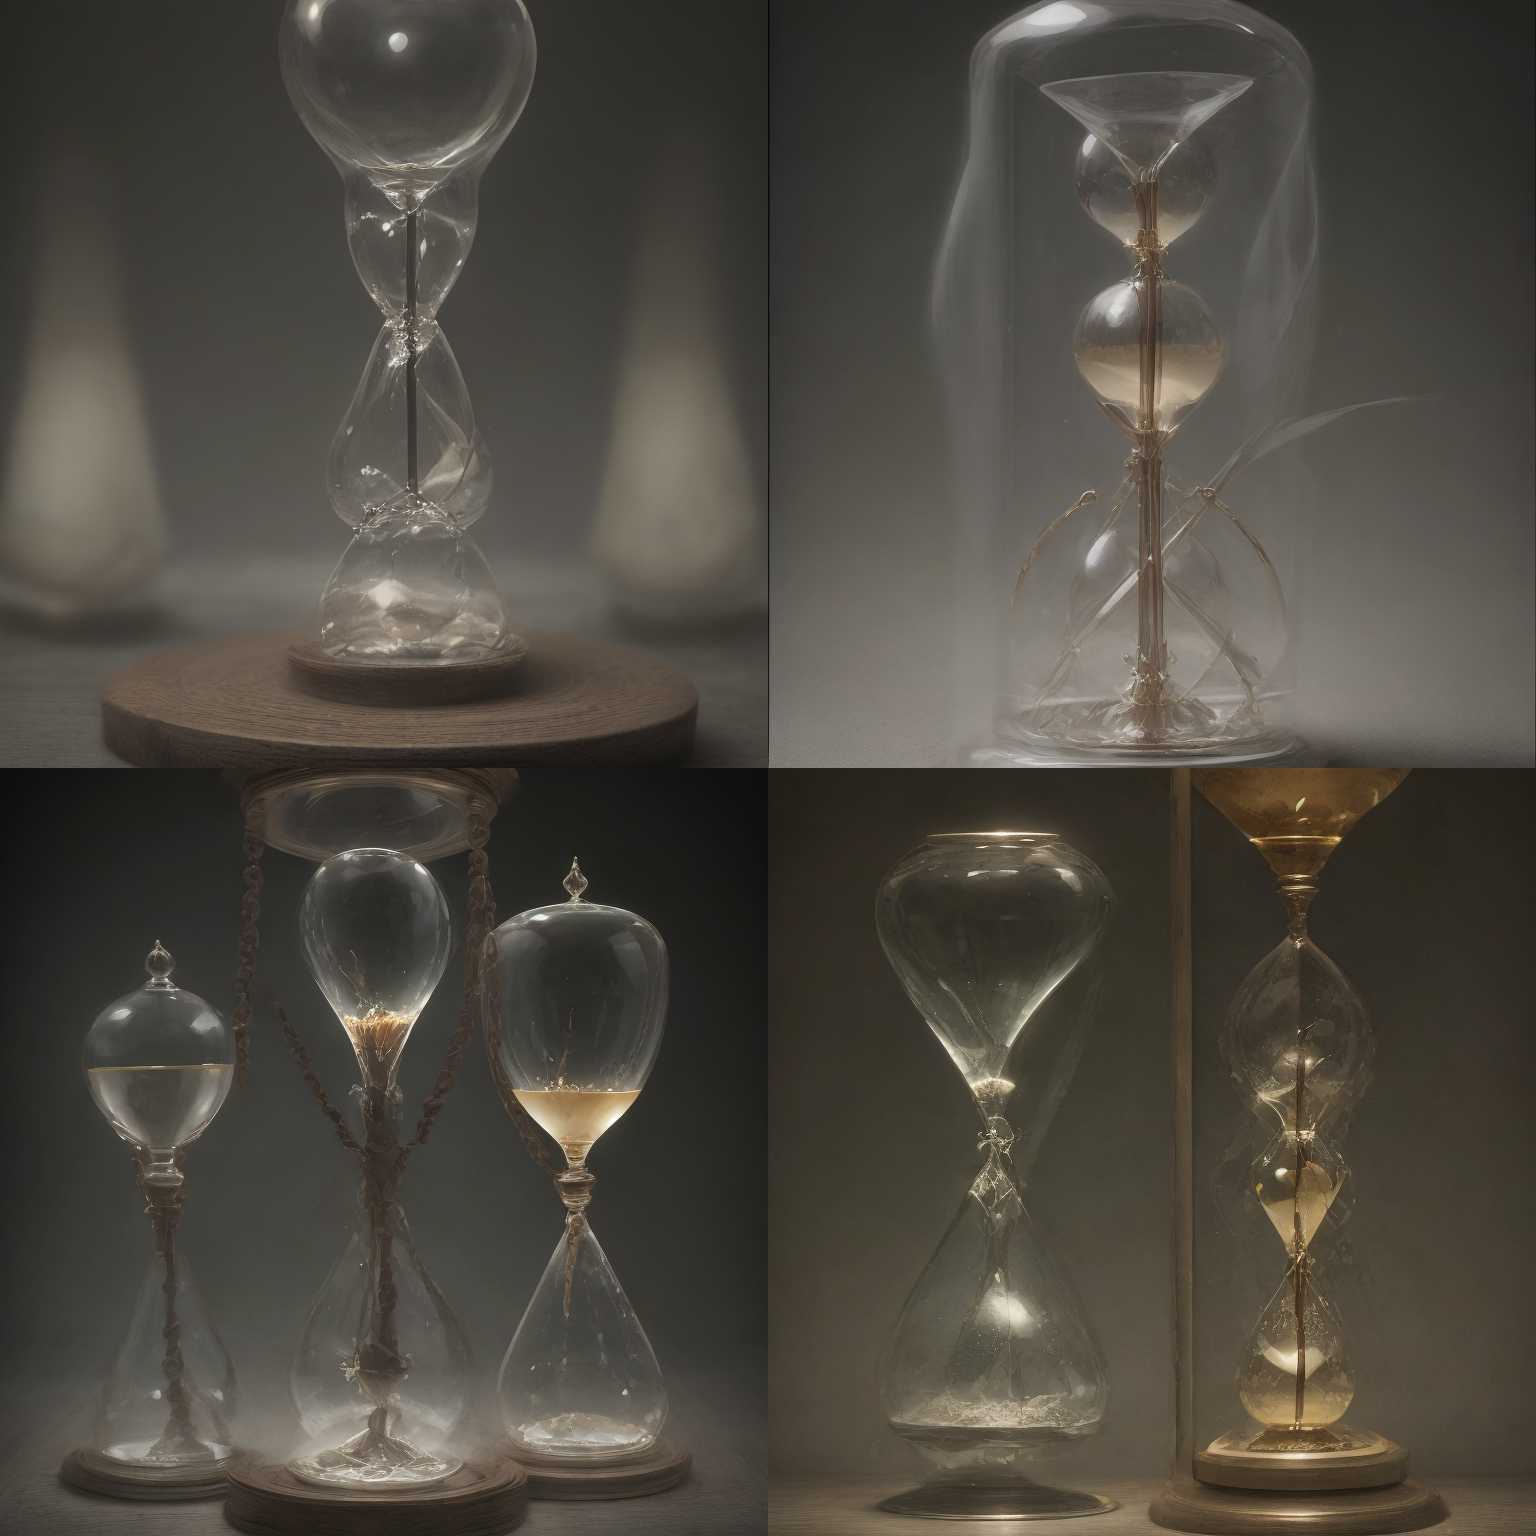 An hourglass just finishing its counting